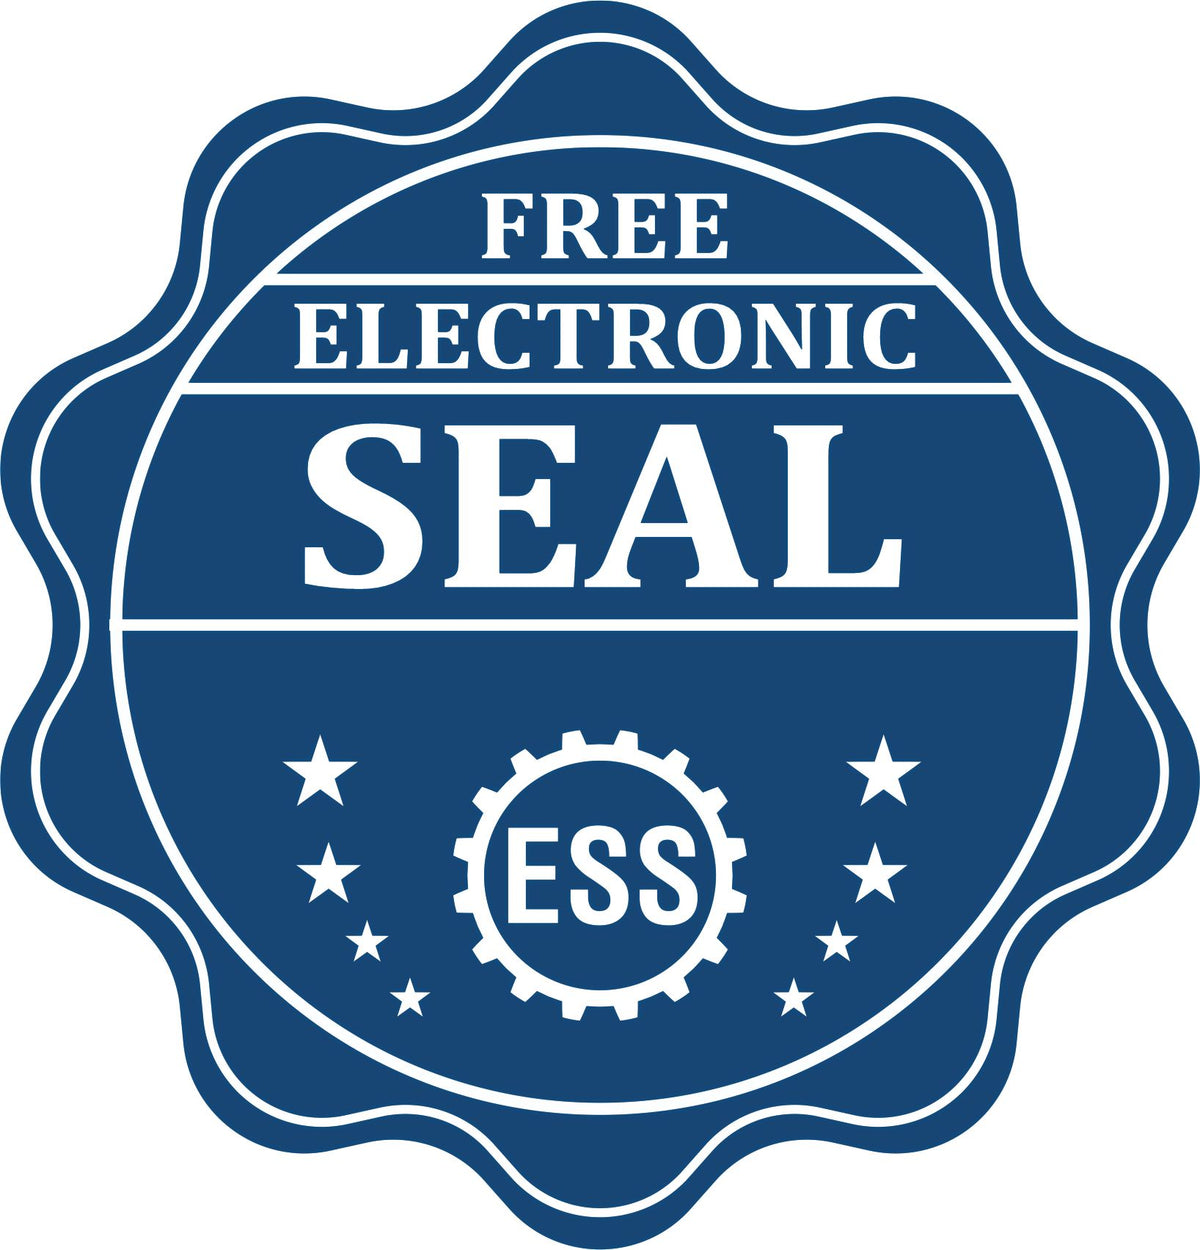 A badge showing a free electronic seal for the Louisiana Geologist Desk Seal with stars and the ESS gear on the emblem.